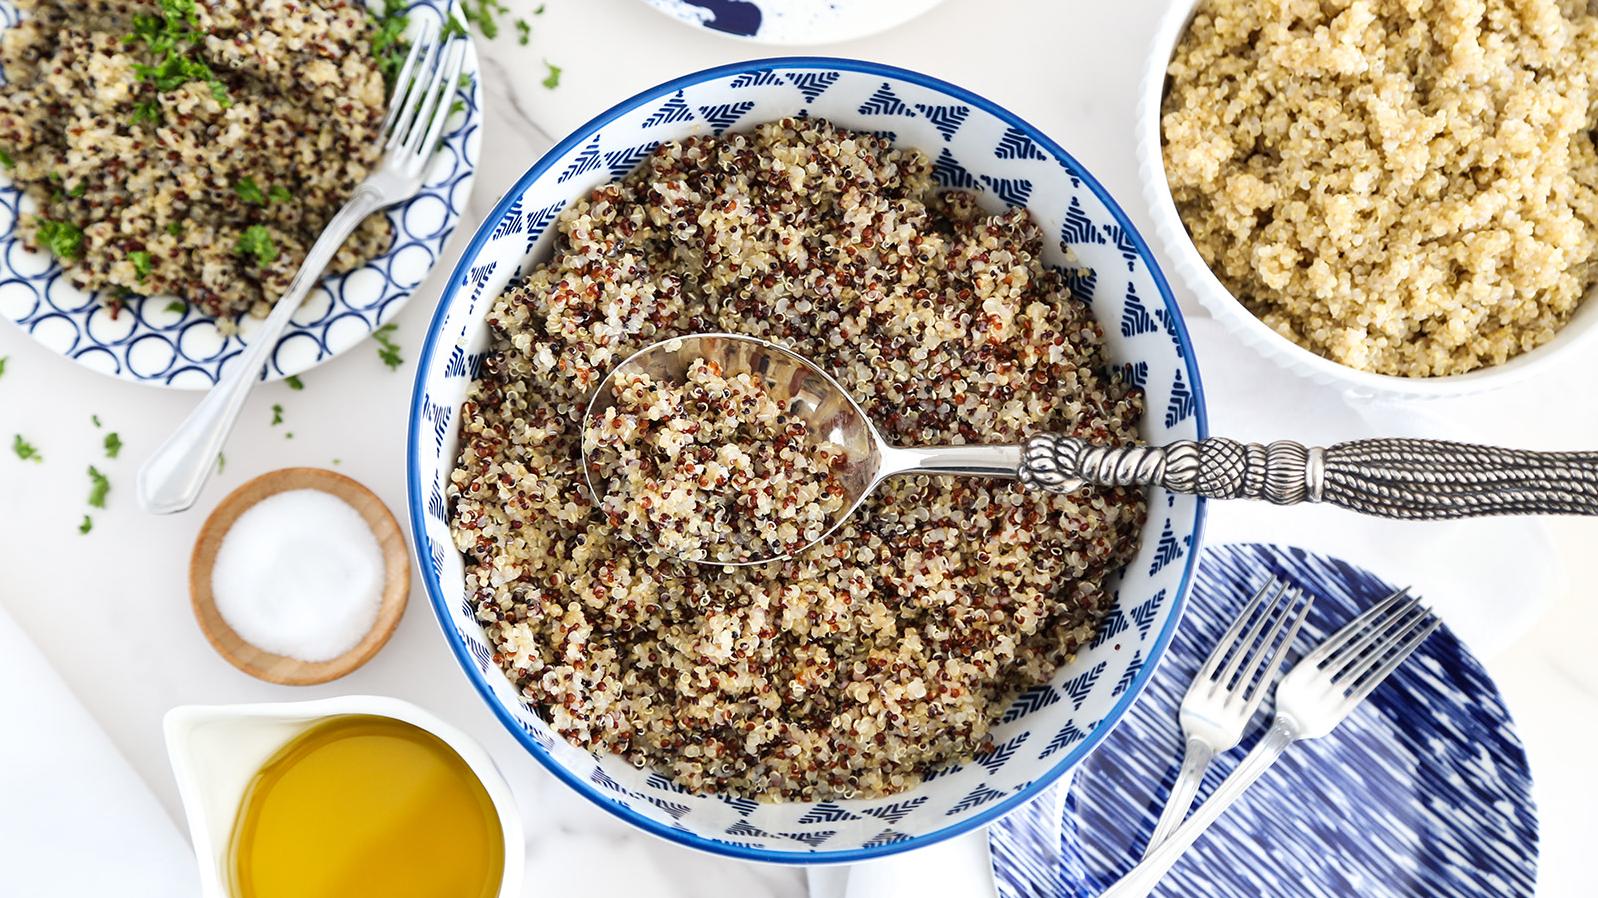  Quinoa and asparagus - a match made in culinary heaven!